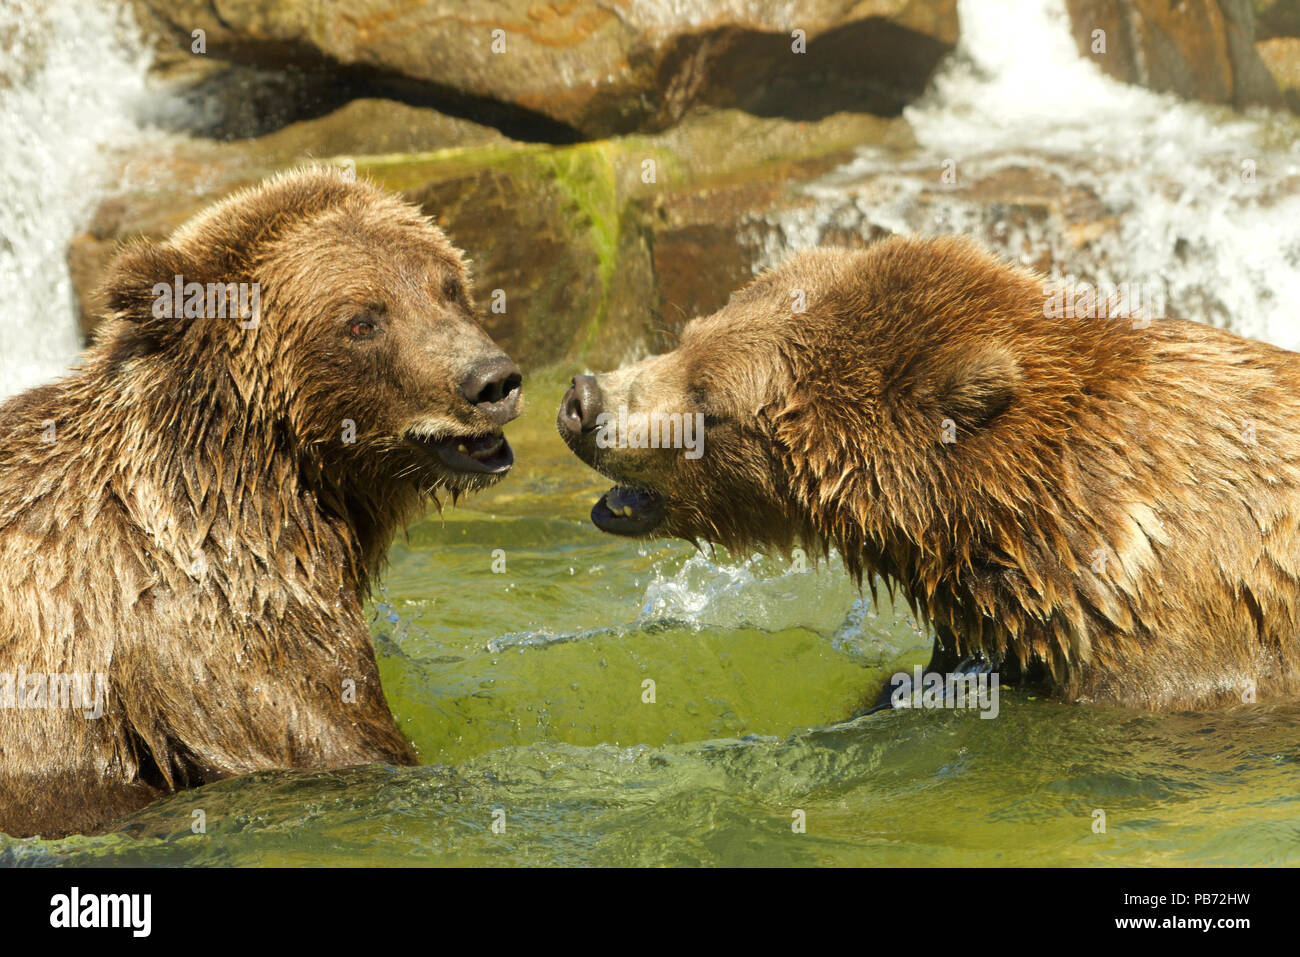 Two adolescent grizzly bears, or North American brown bear, play fighting in a pond of water, water falling over rocks in the background. Stock Photo